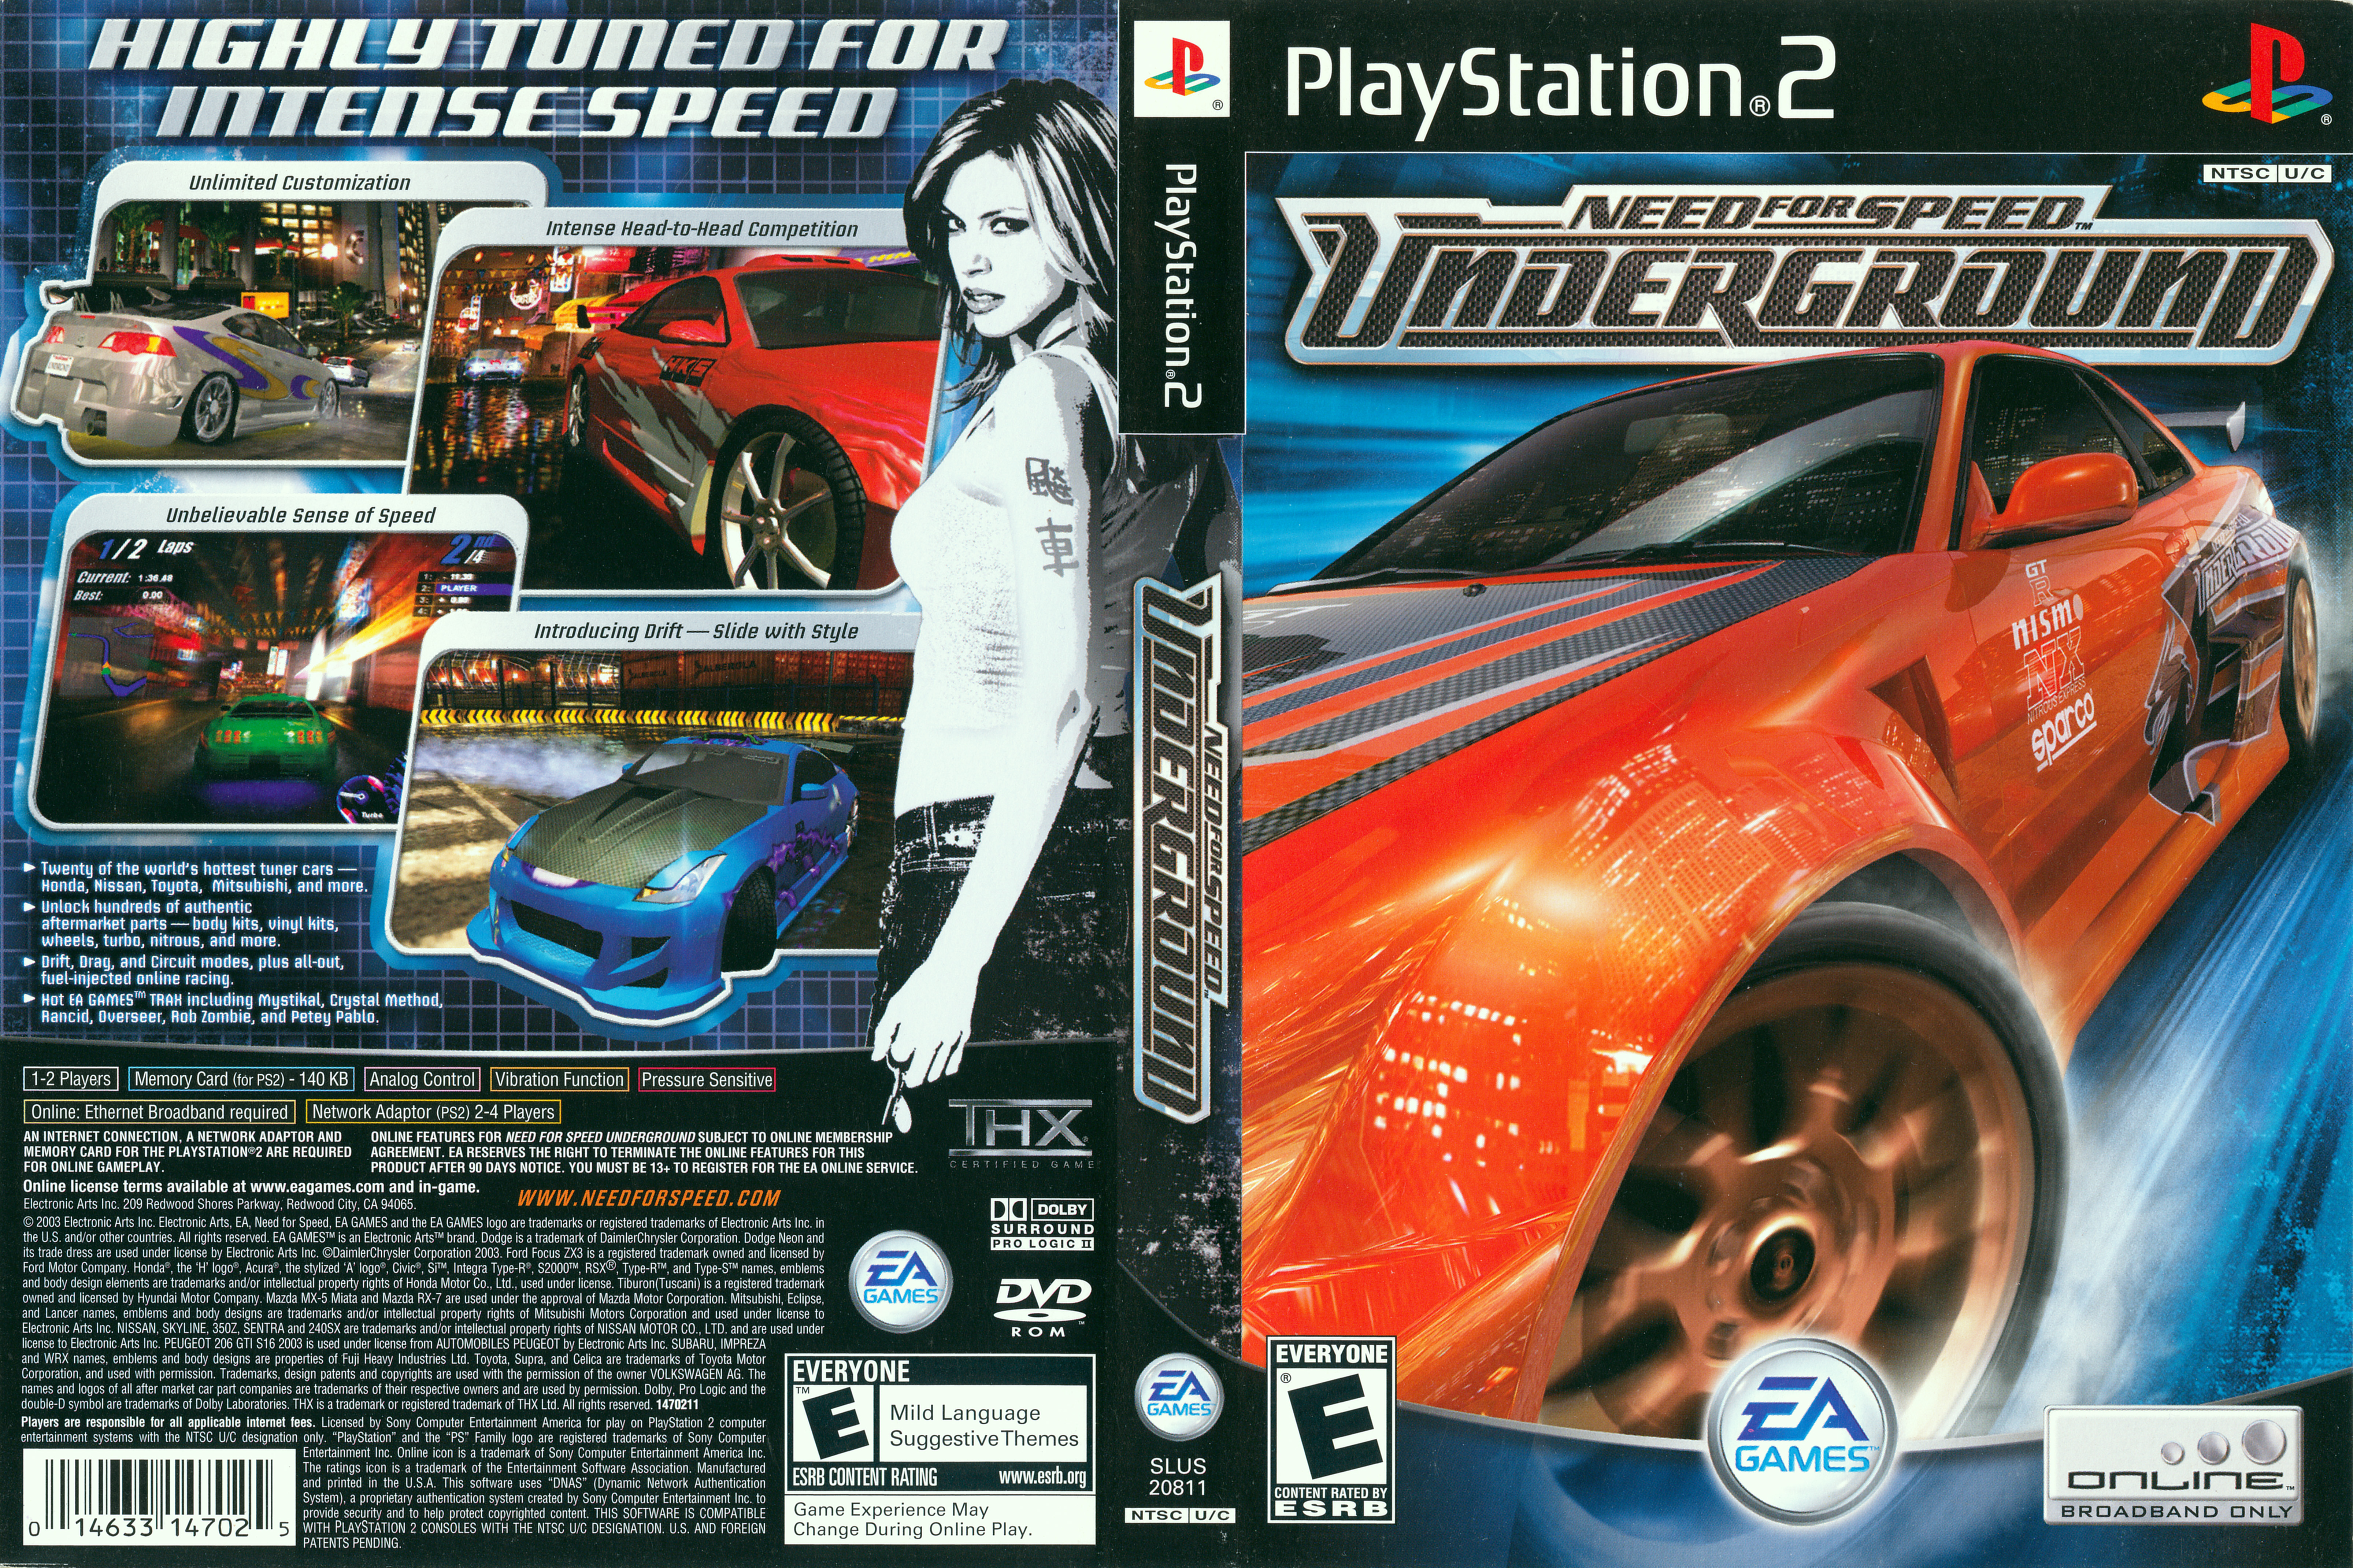 Speed 2 games. Ps2 диск need for Speed. Sony PLAYSTATION 2 need for Speed. Need for Speed Underground на ПС ПС 4. NFS ps2.